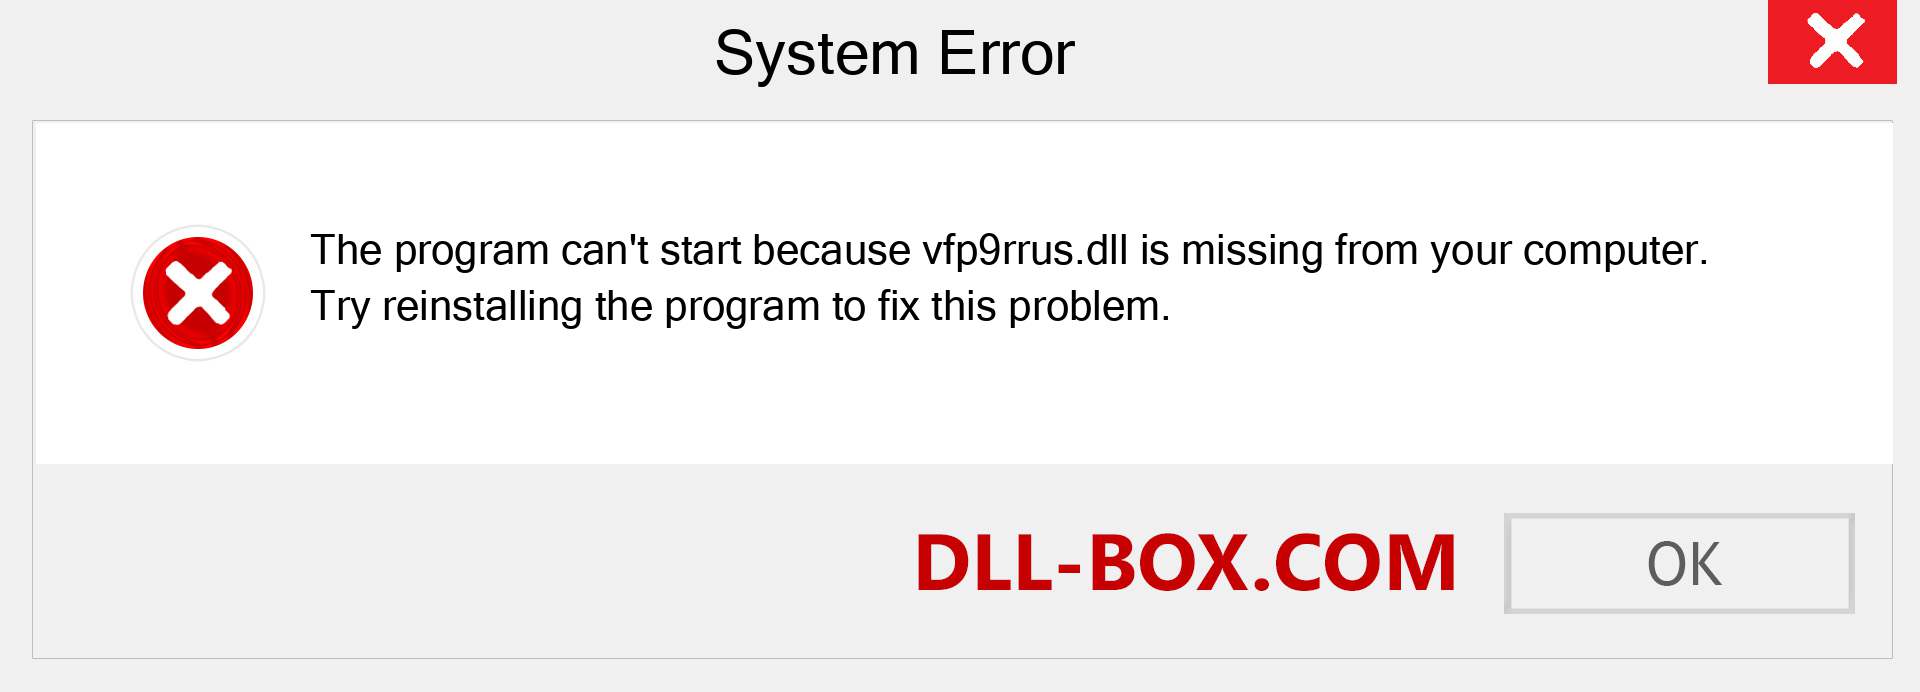  vfp9rrus.dll file is missing?. Download for Windows 7, 8, 10 - Fix  vfp9rrus dll Missing Error on Windows, photos, images